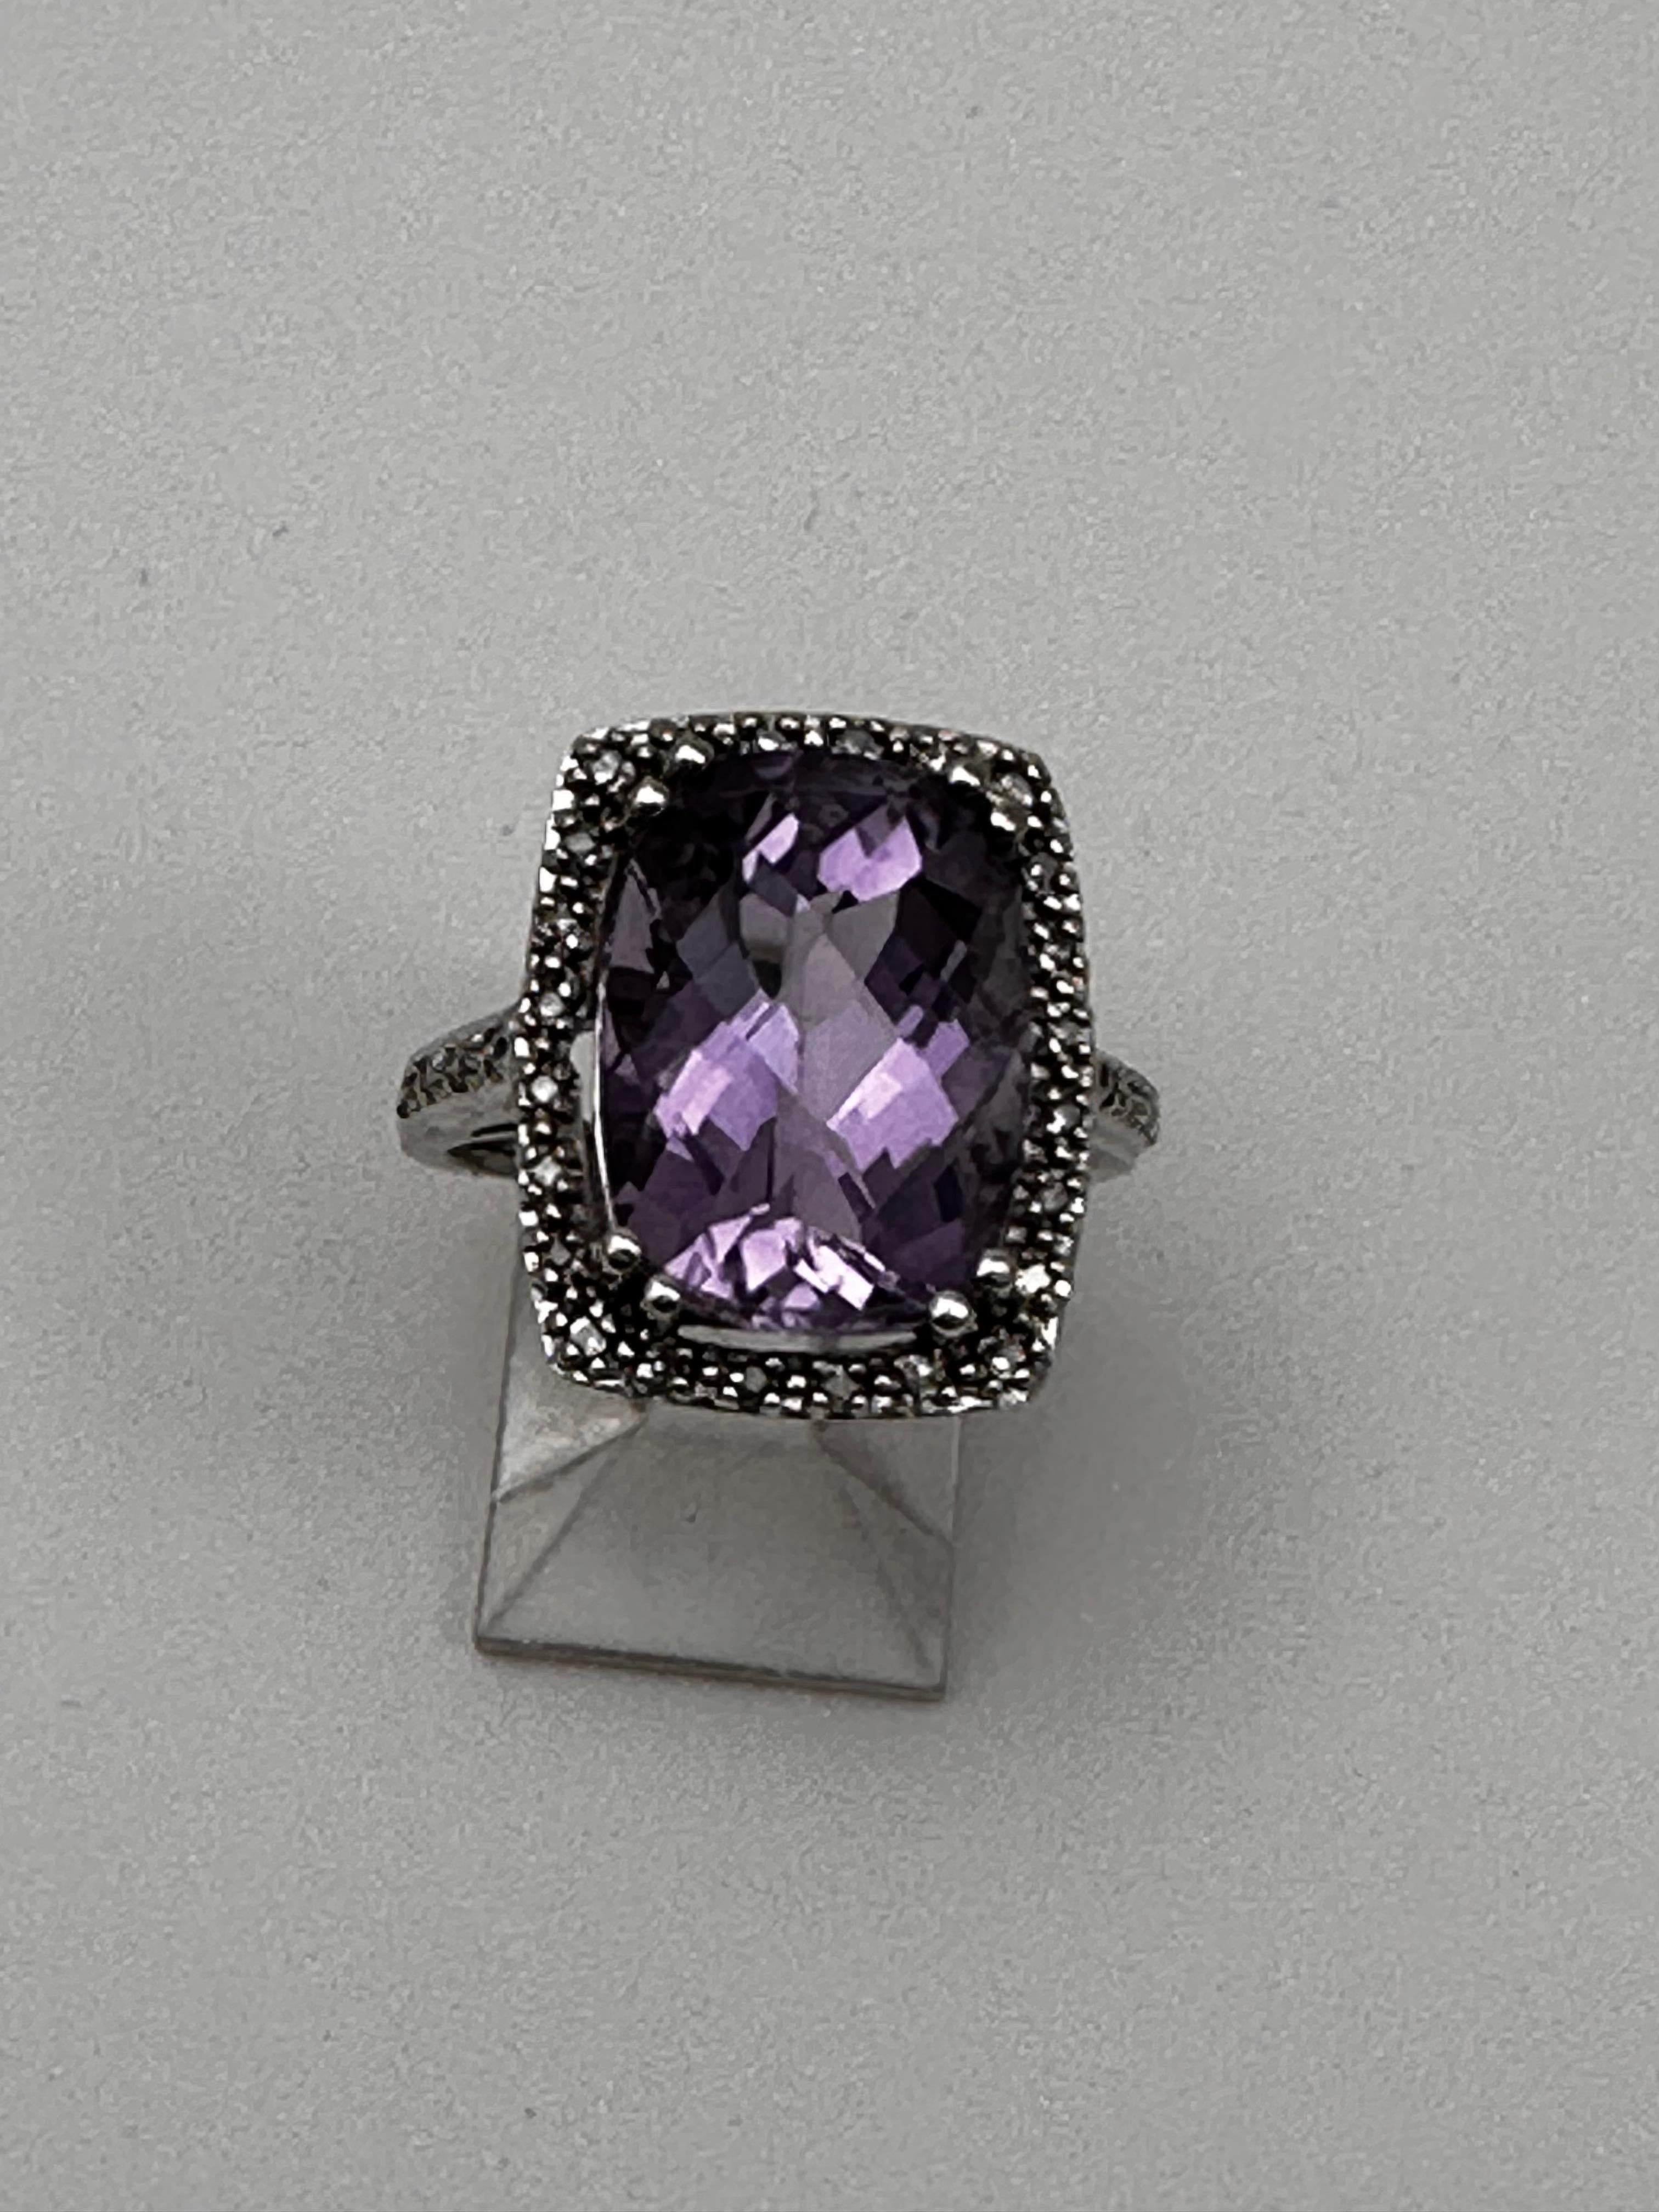 Women's 10kt White Gold 11mm x 15mm Cushion Cut Amethyst and Diamond Ring Size 6 3/4 For Sale